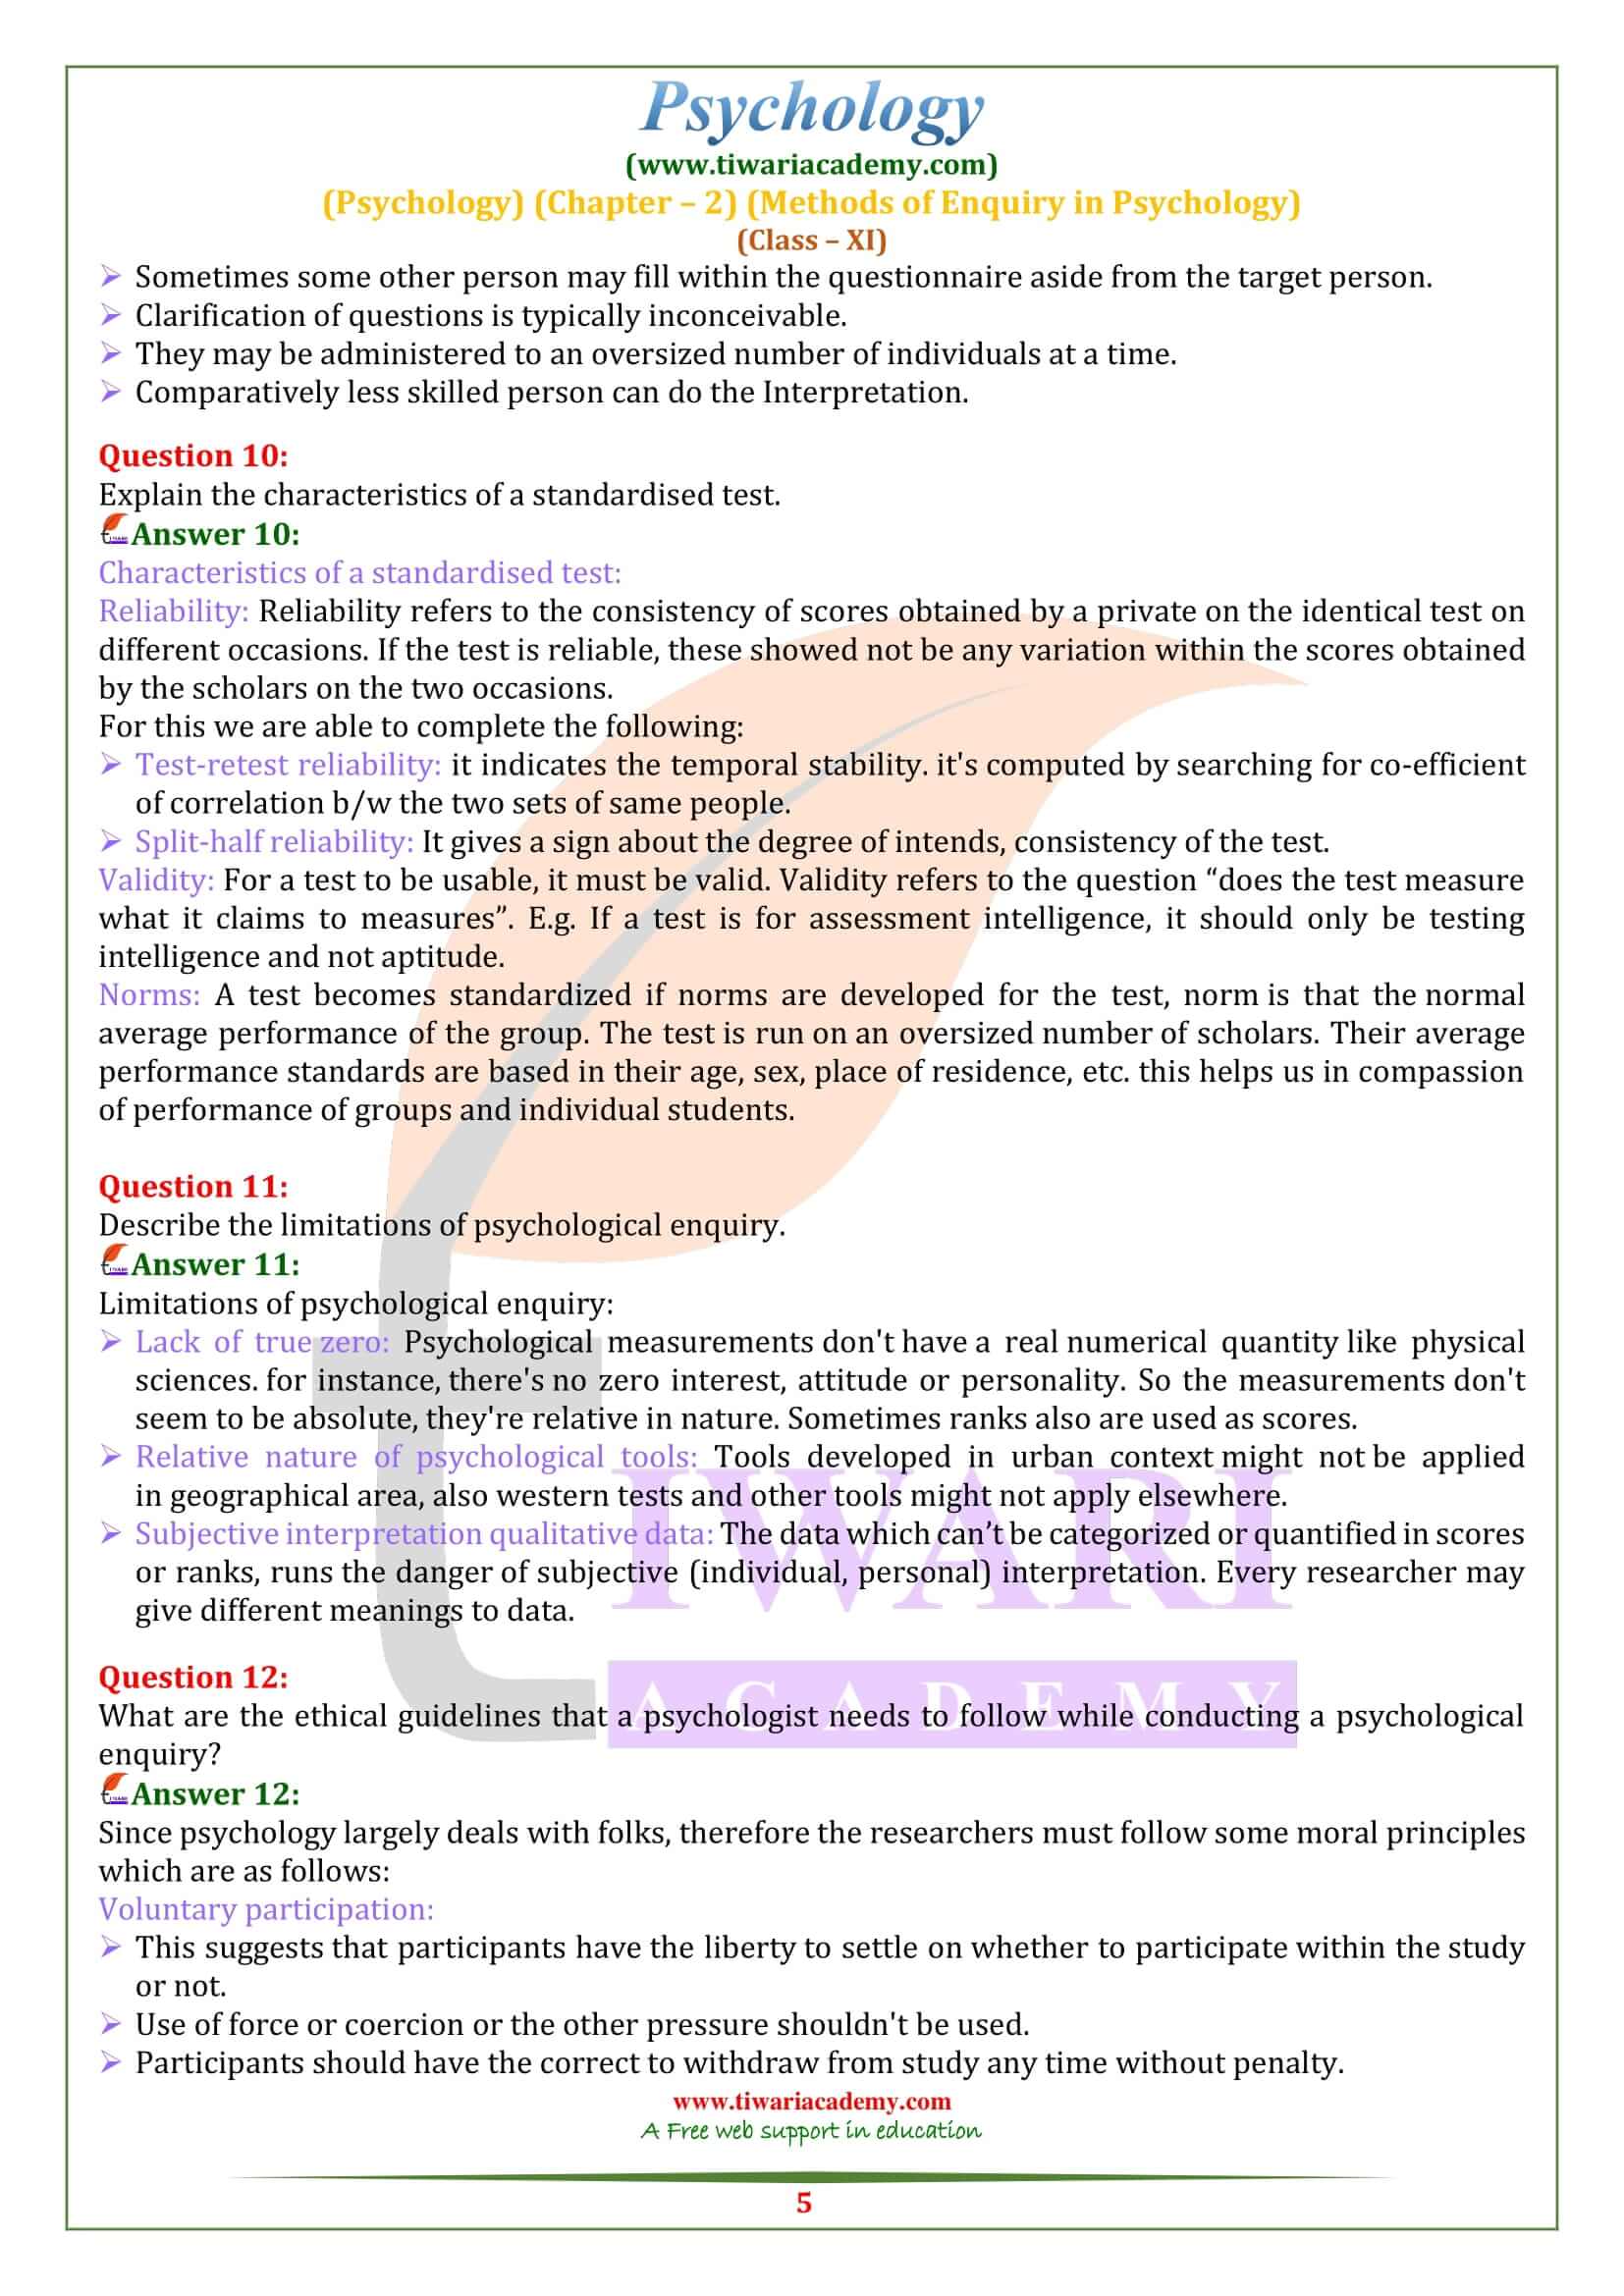 NCERT Solutions for Class 11 Psychology Chapter 2